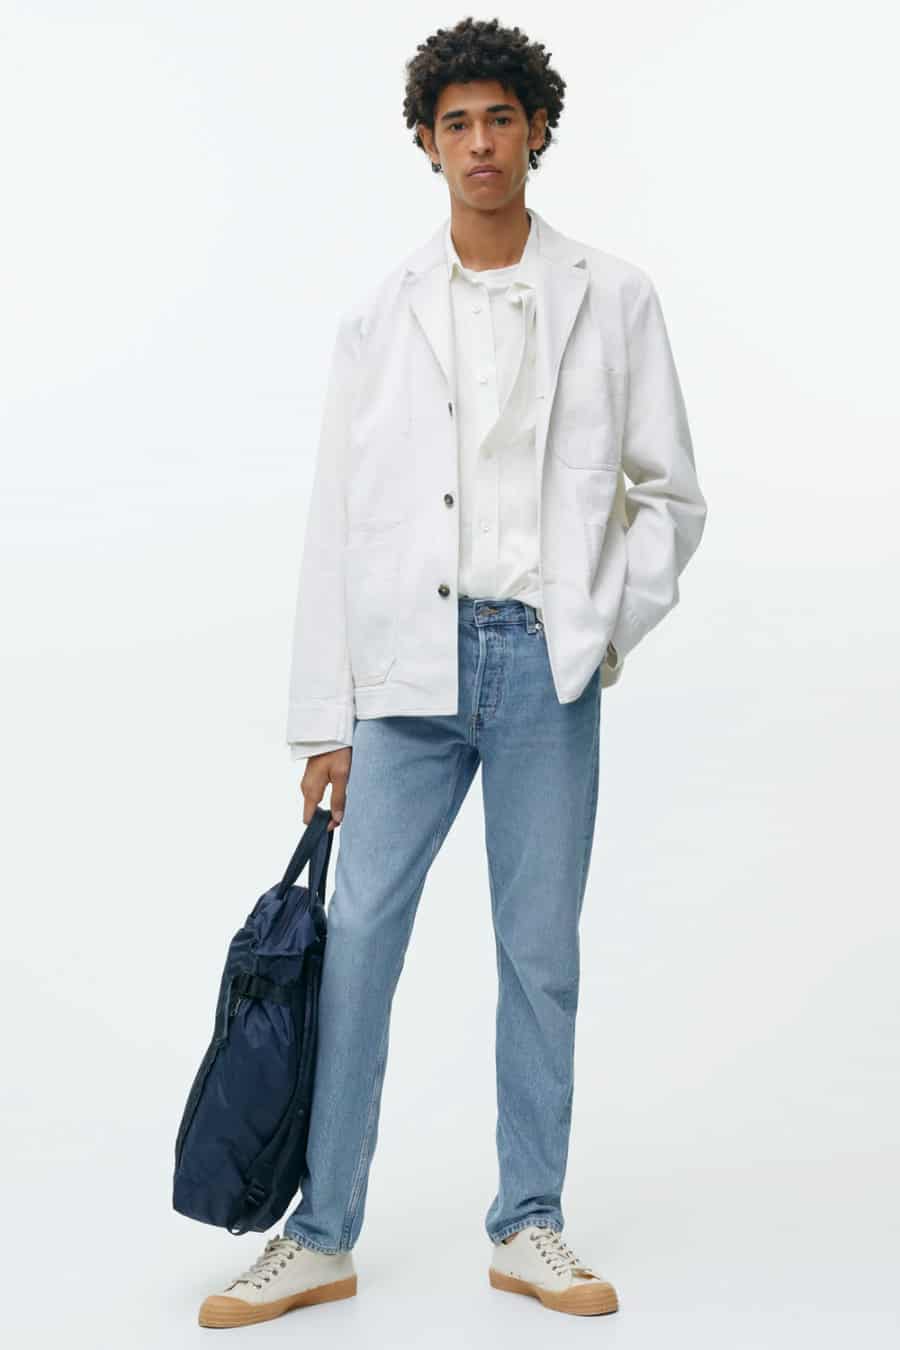 Men's light wash blue jeans with white T-shirt and white chore jacket outfit